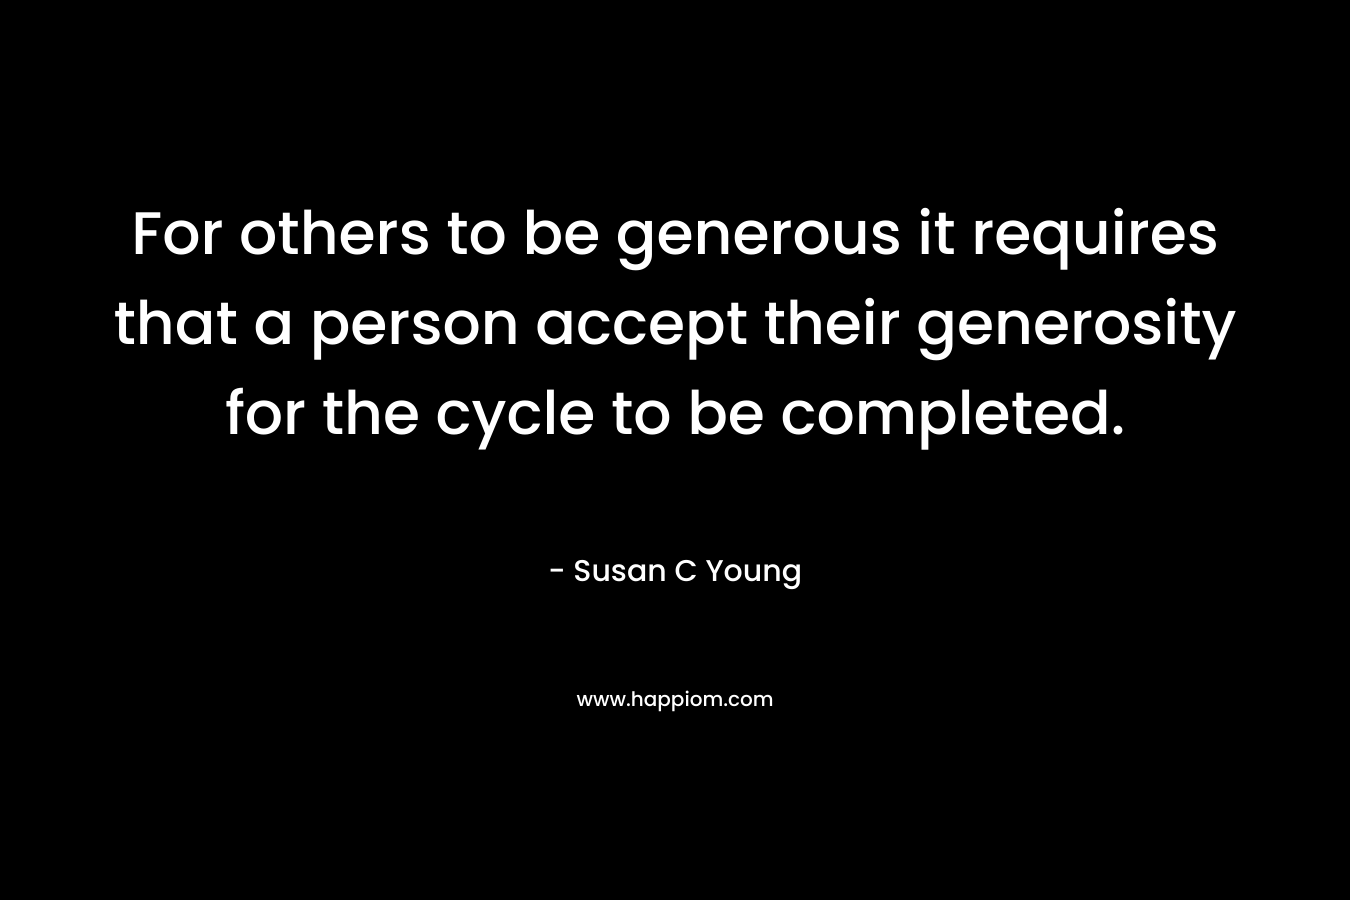 For others to be generous it requires that a person accept their generosity for the cycle to be completed. – Susan C Young